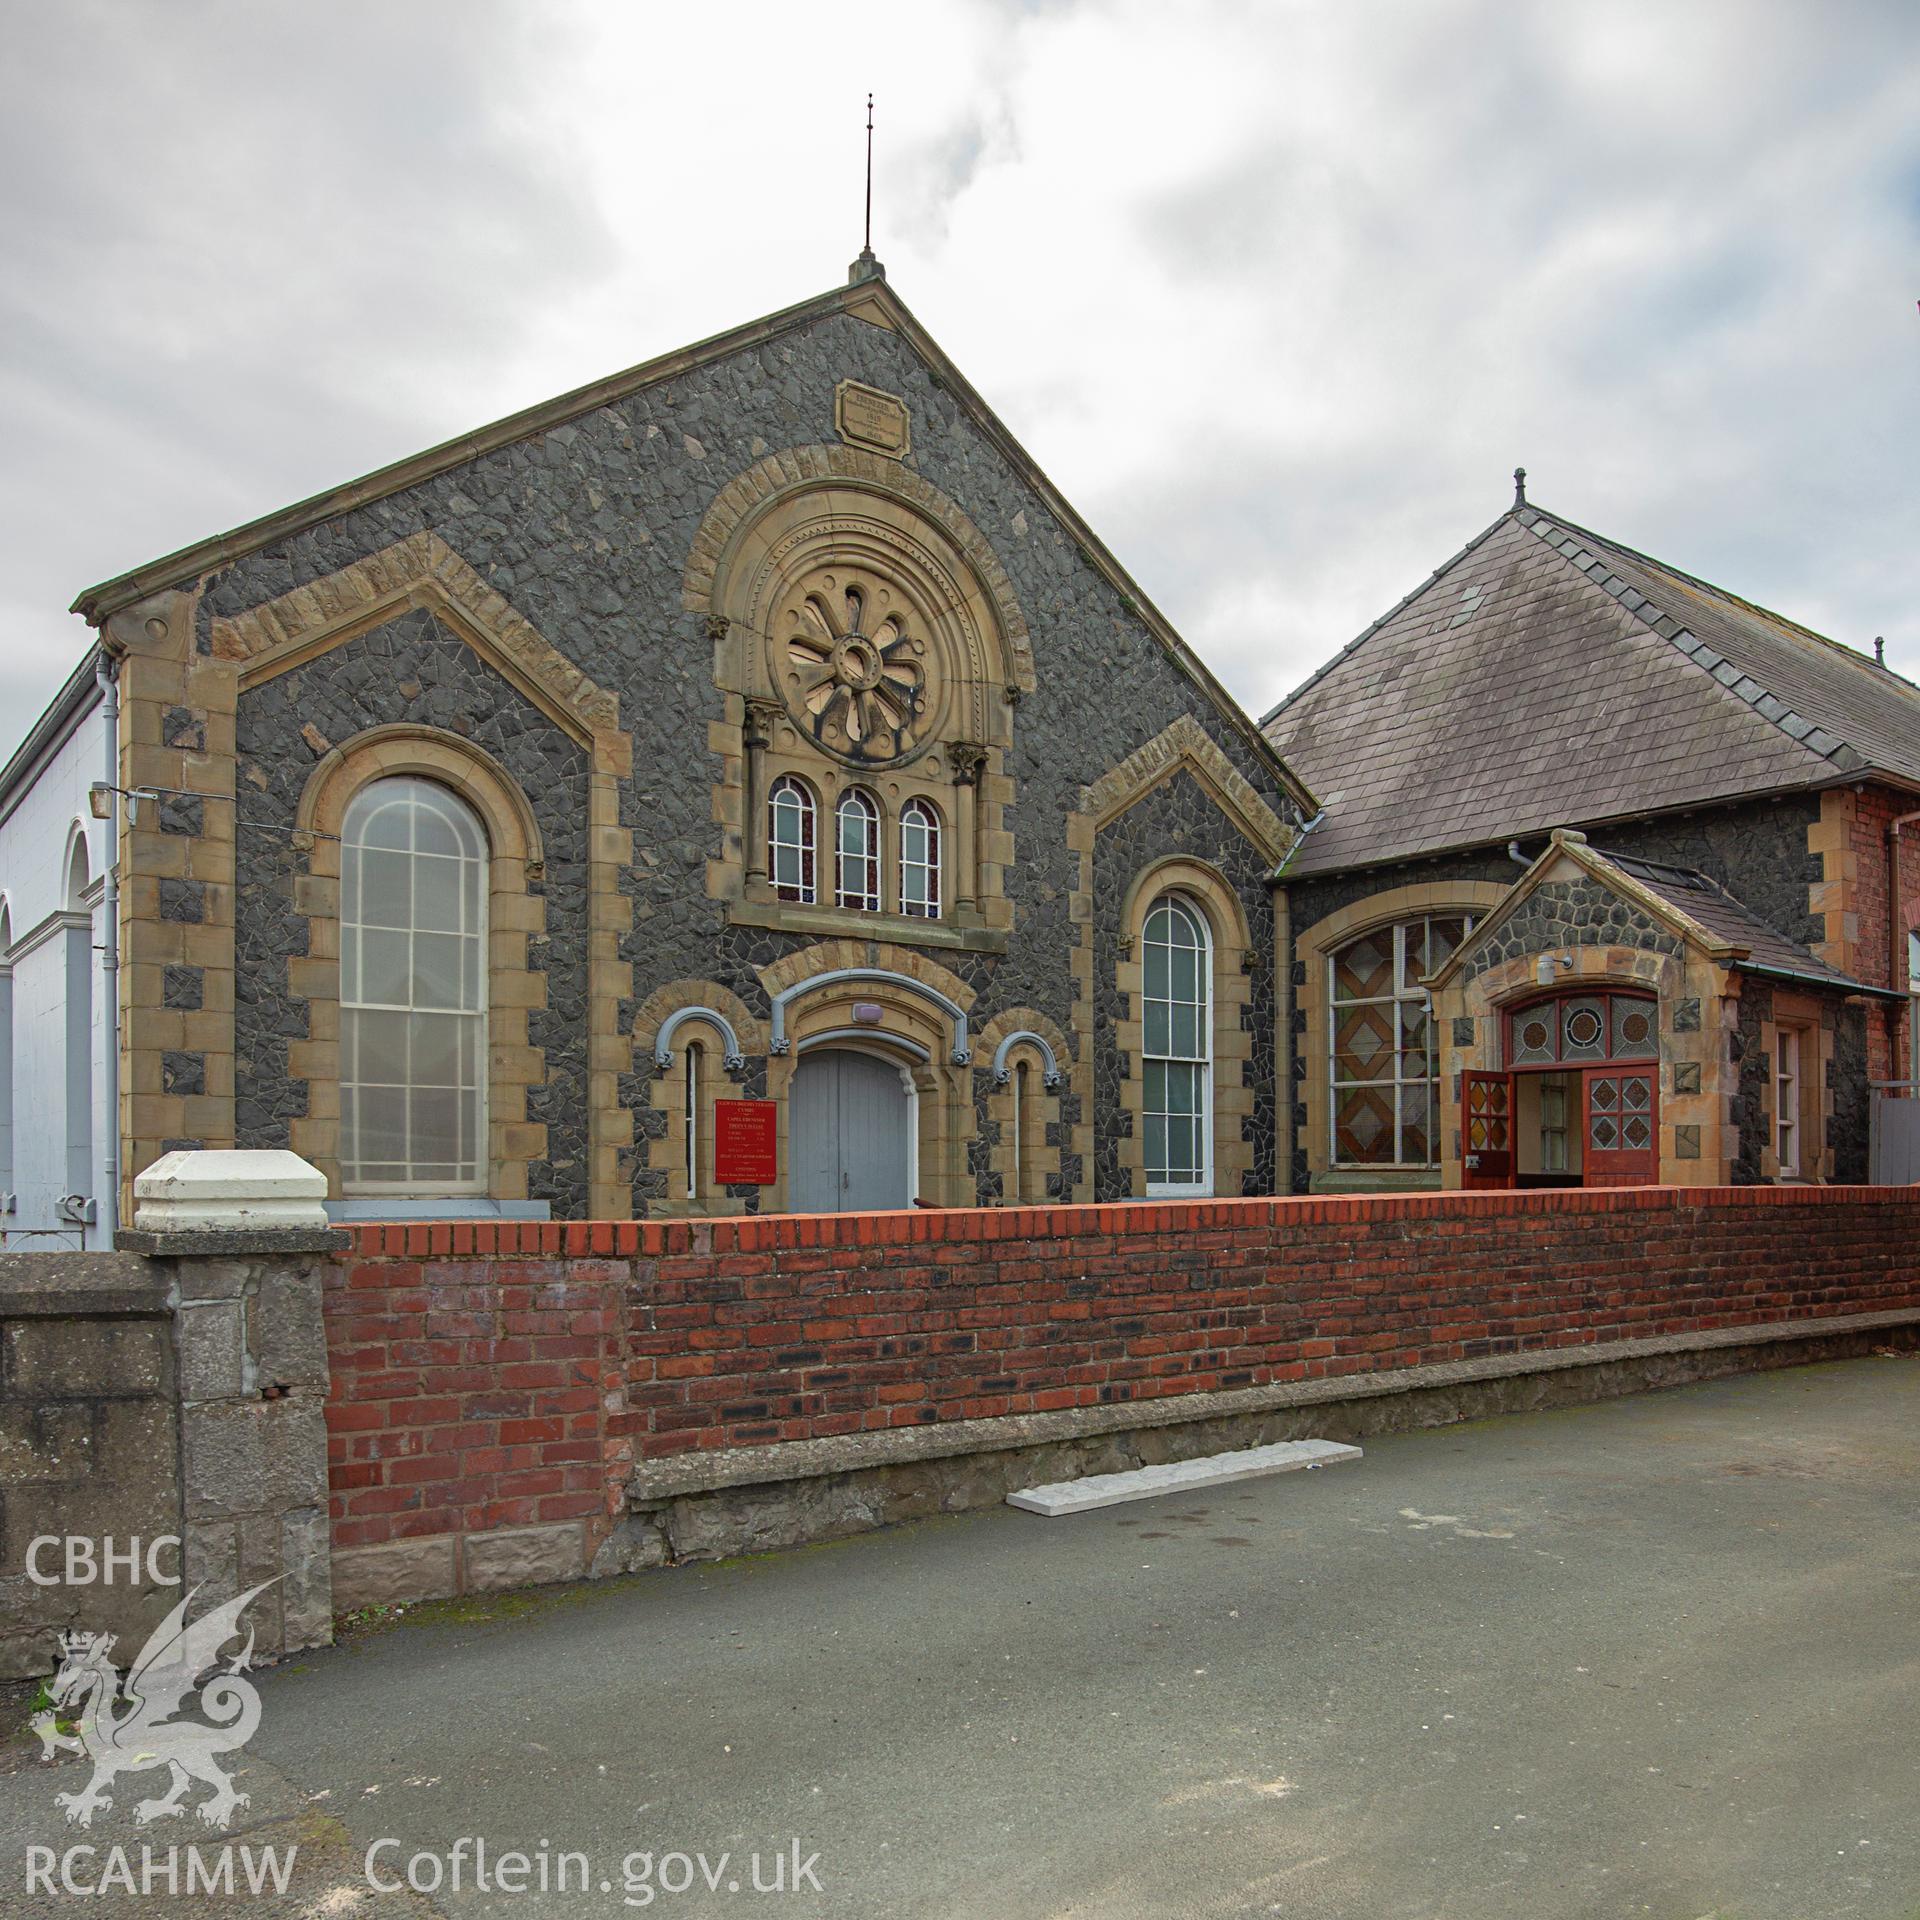 Colour photograph showing front elevation and entrance of Rhuddlan Welsh Calvinistic Methodist Chapel, Parliament Street, Rhuddlan. Photographed by Richard Barrett on 26th September 2018.